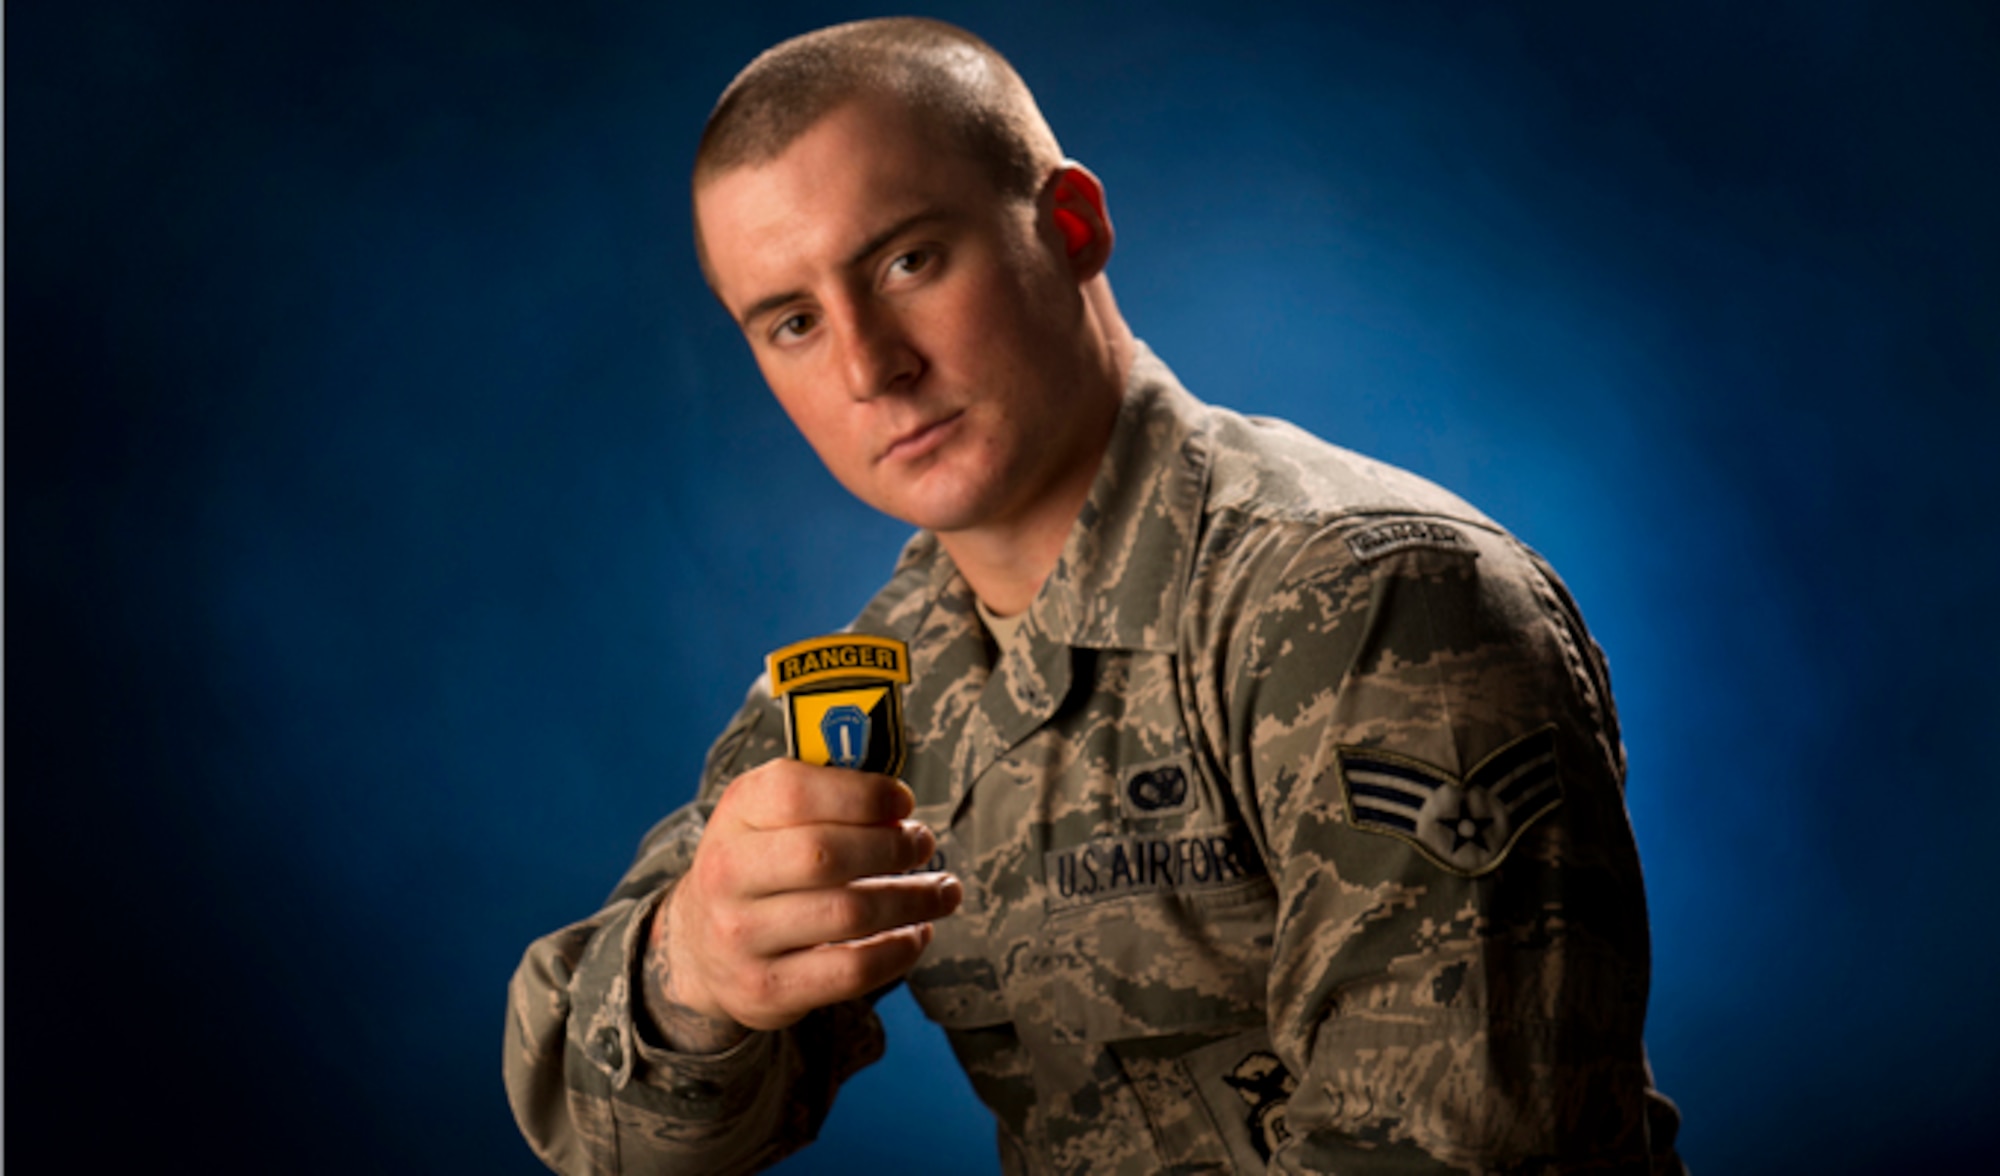 Senior Airman Stephen Becker holds a commander's coin from the U.S. Army Ranger School Jan. 31, 2014, at Joint Base Elmendorf-Richardson, Alaska. Becker is the 257th Airman to graduate from the U.S. Army Ranger School at Ft. Benning, Ga. The purpose of the school is to develop combat skills of selected officers and enlisted men by requiring them to perform effectively as small unit leaders in a realistic tactical environment, under mental and physical stress approaching that found in actual combat. (U.S. Air Force photo/Justin Connaher)